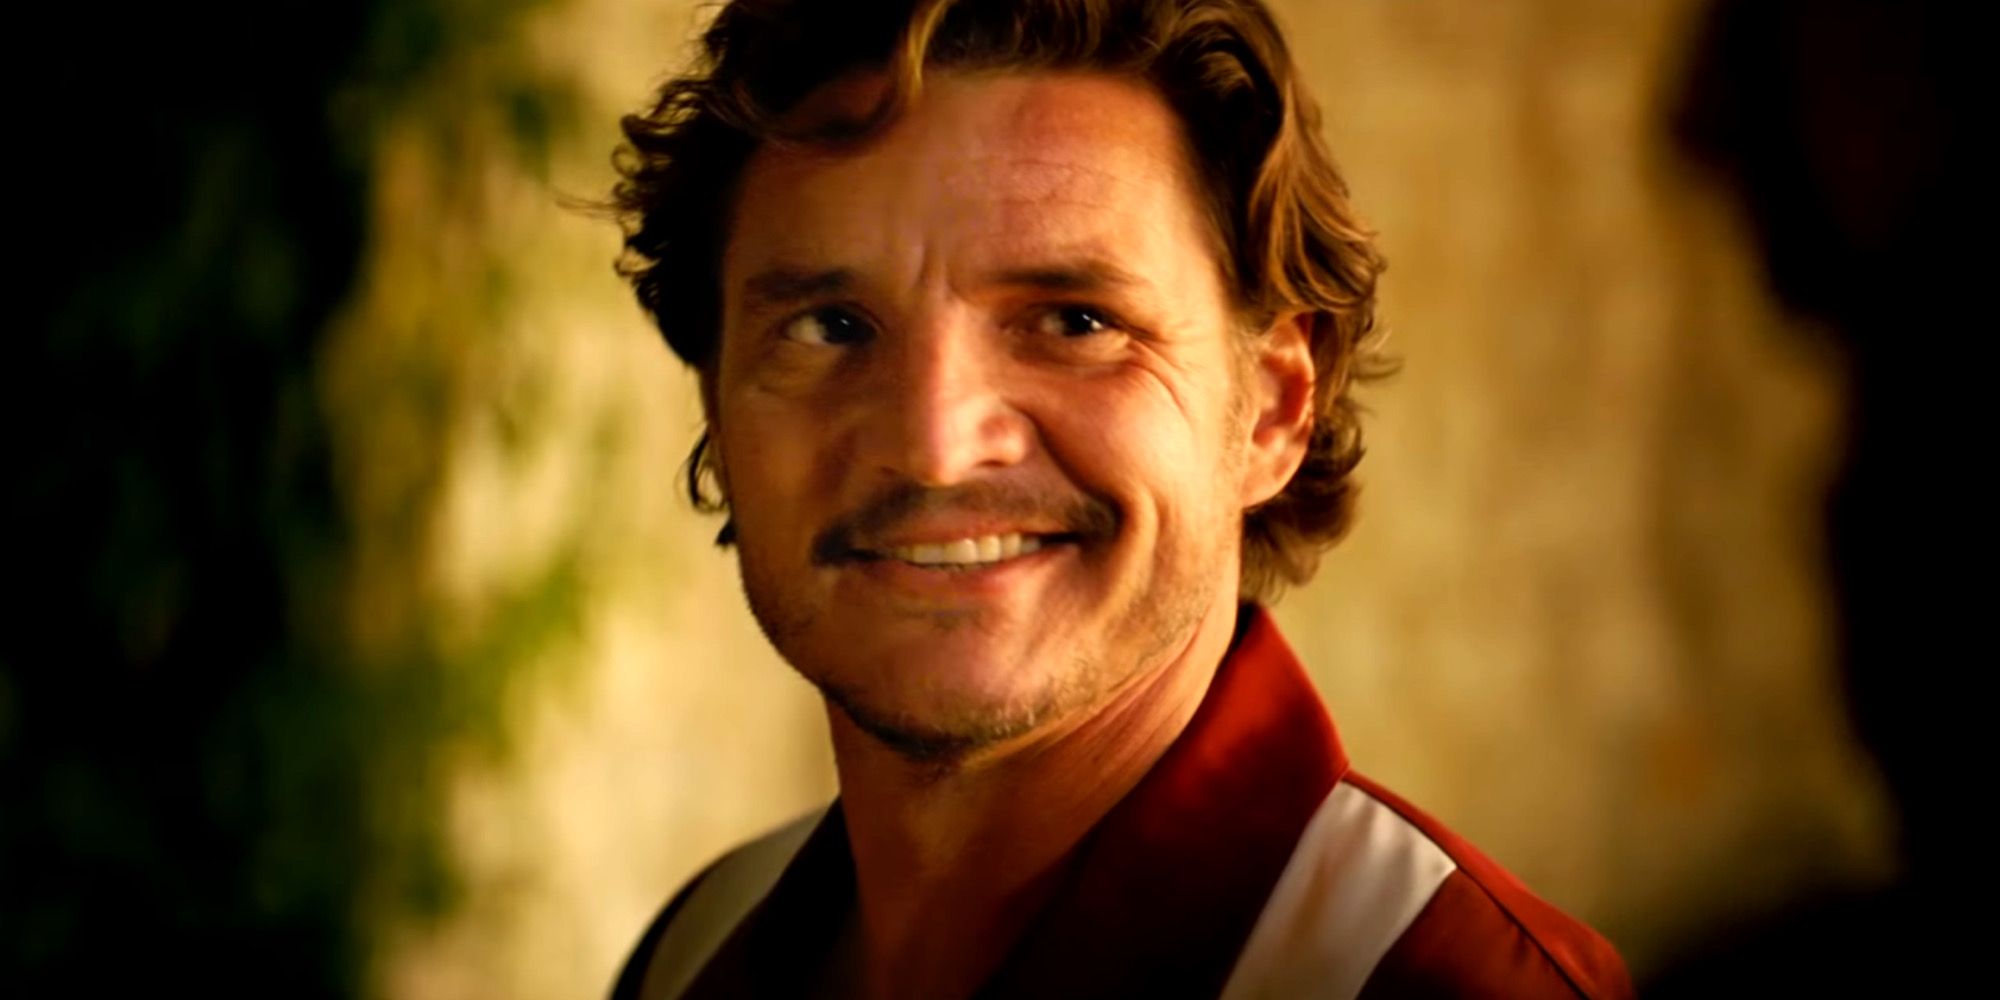 Pedro Pascal as Javi in Unbearable Weight of Massive Talent